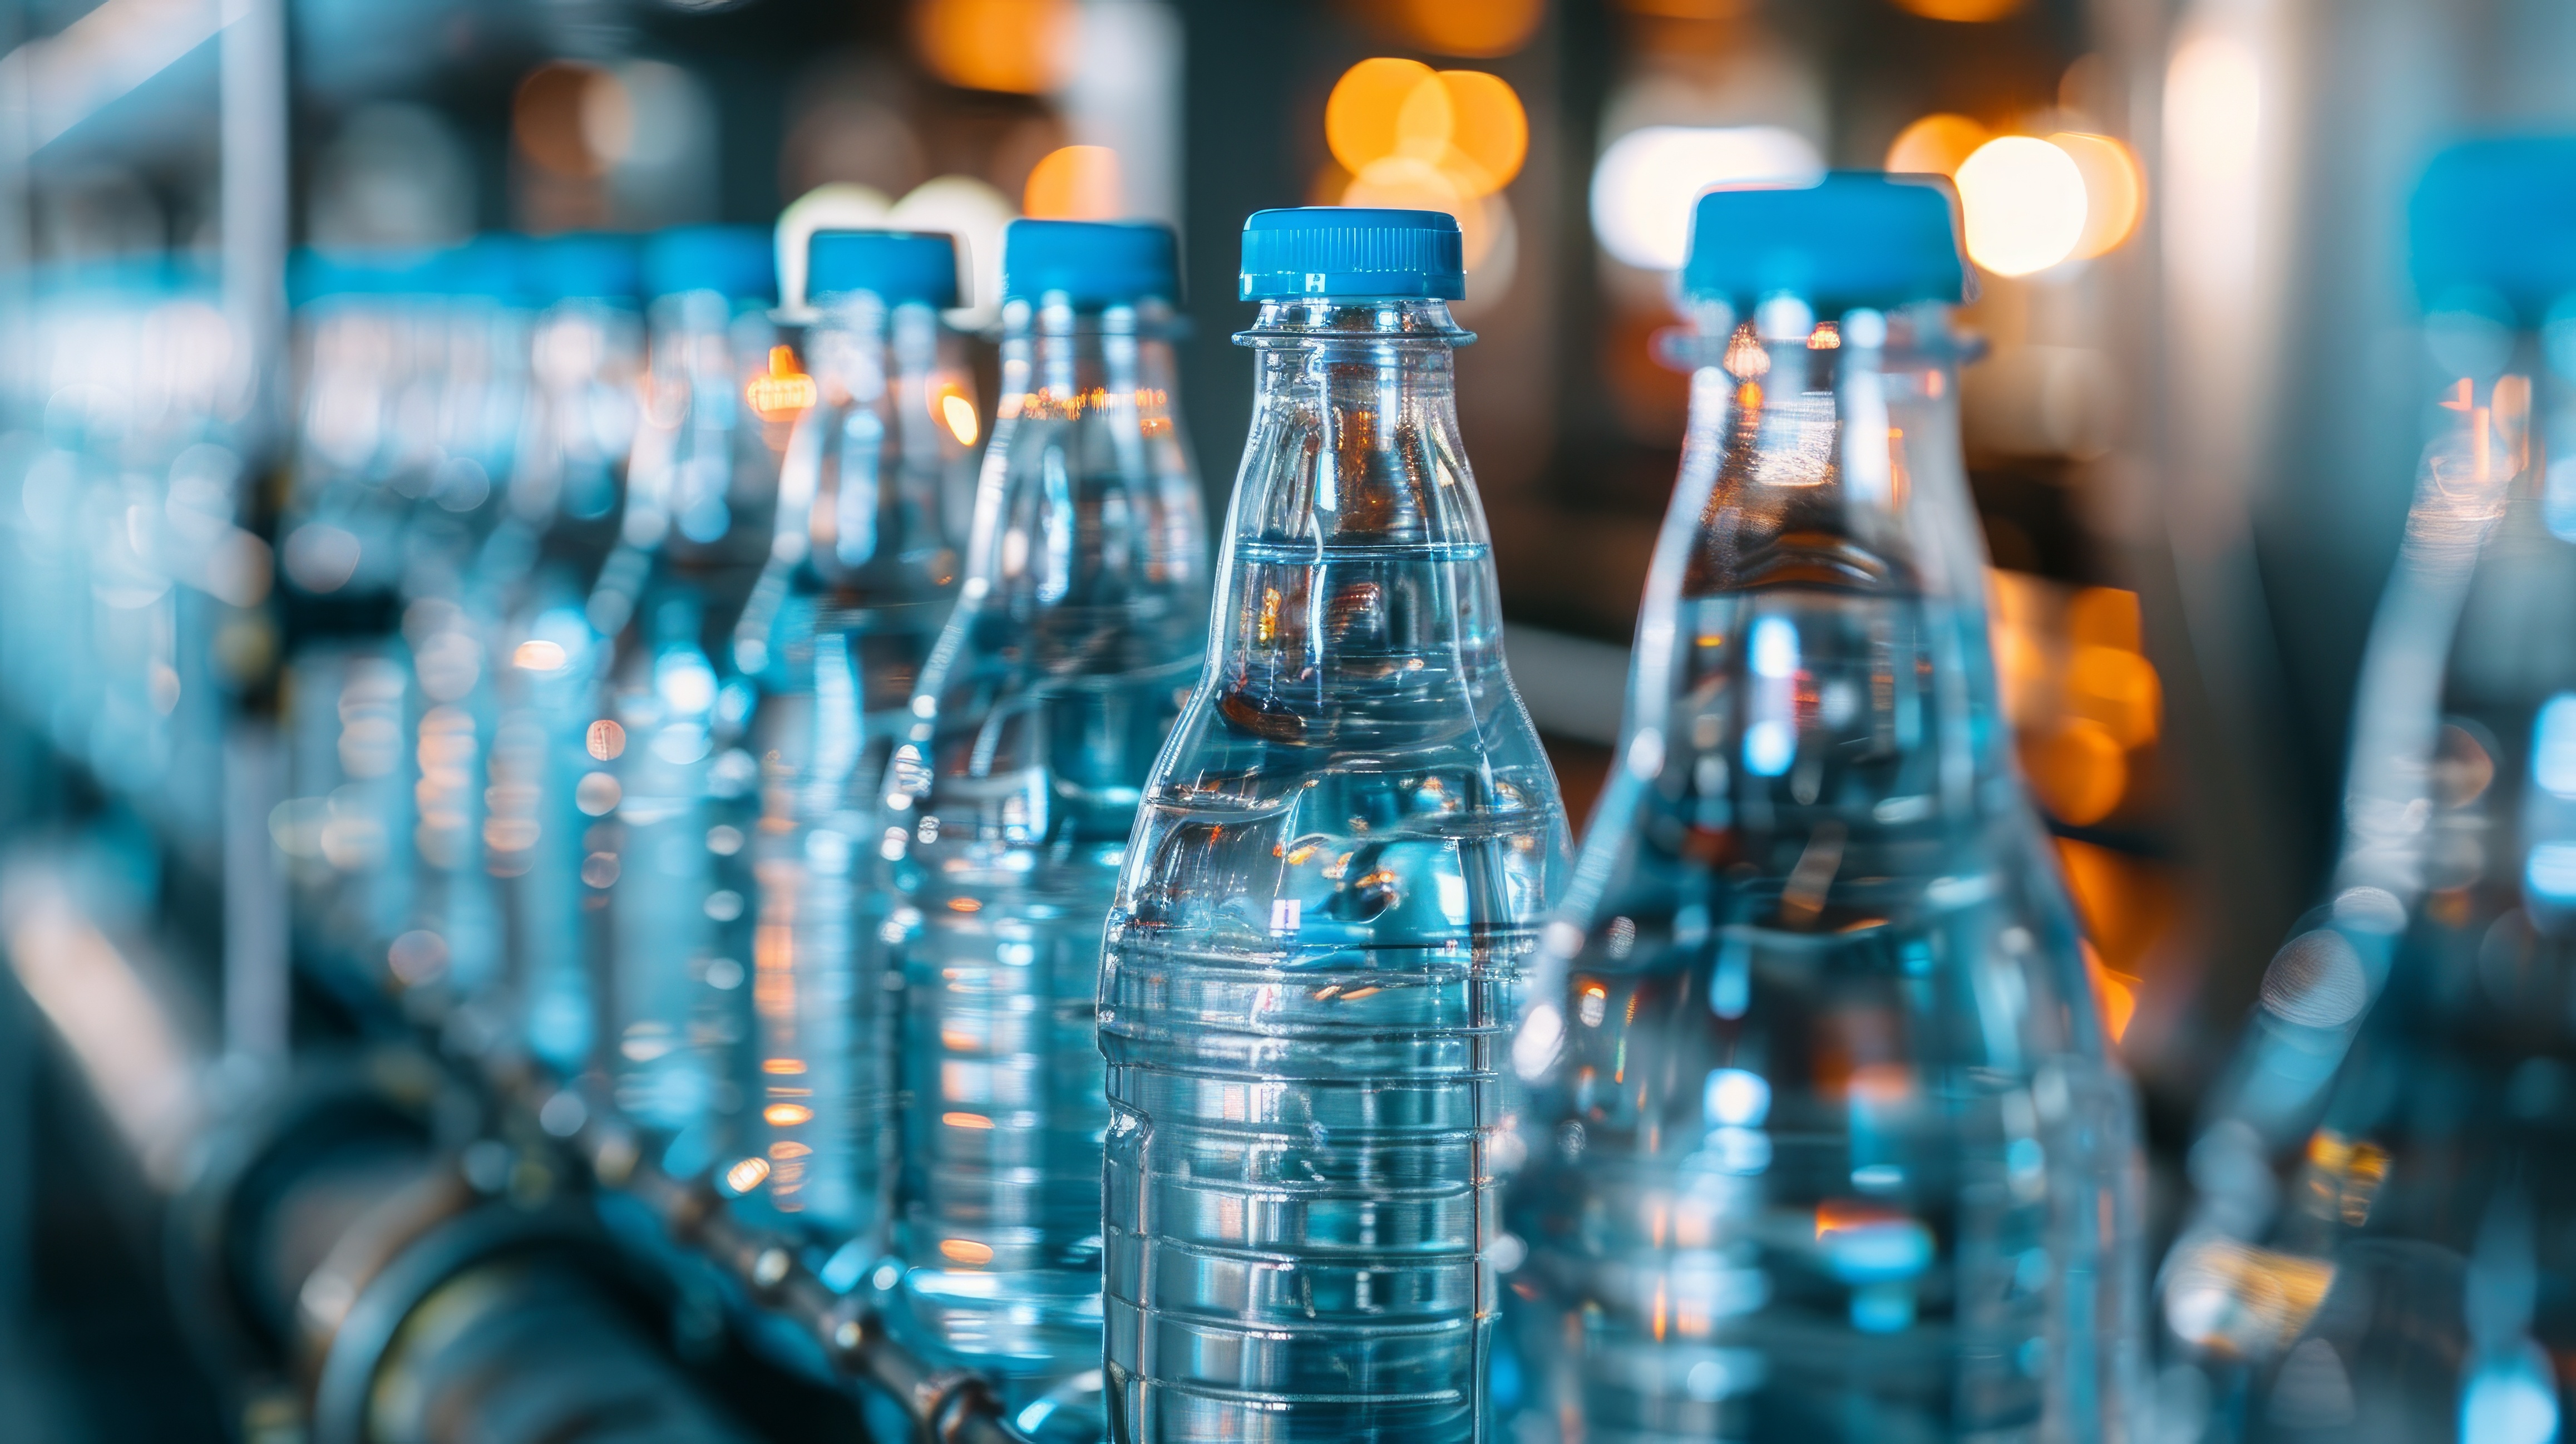 A scene from a food and beverage factory showing PET bottles on a production line being filled with water